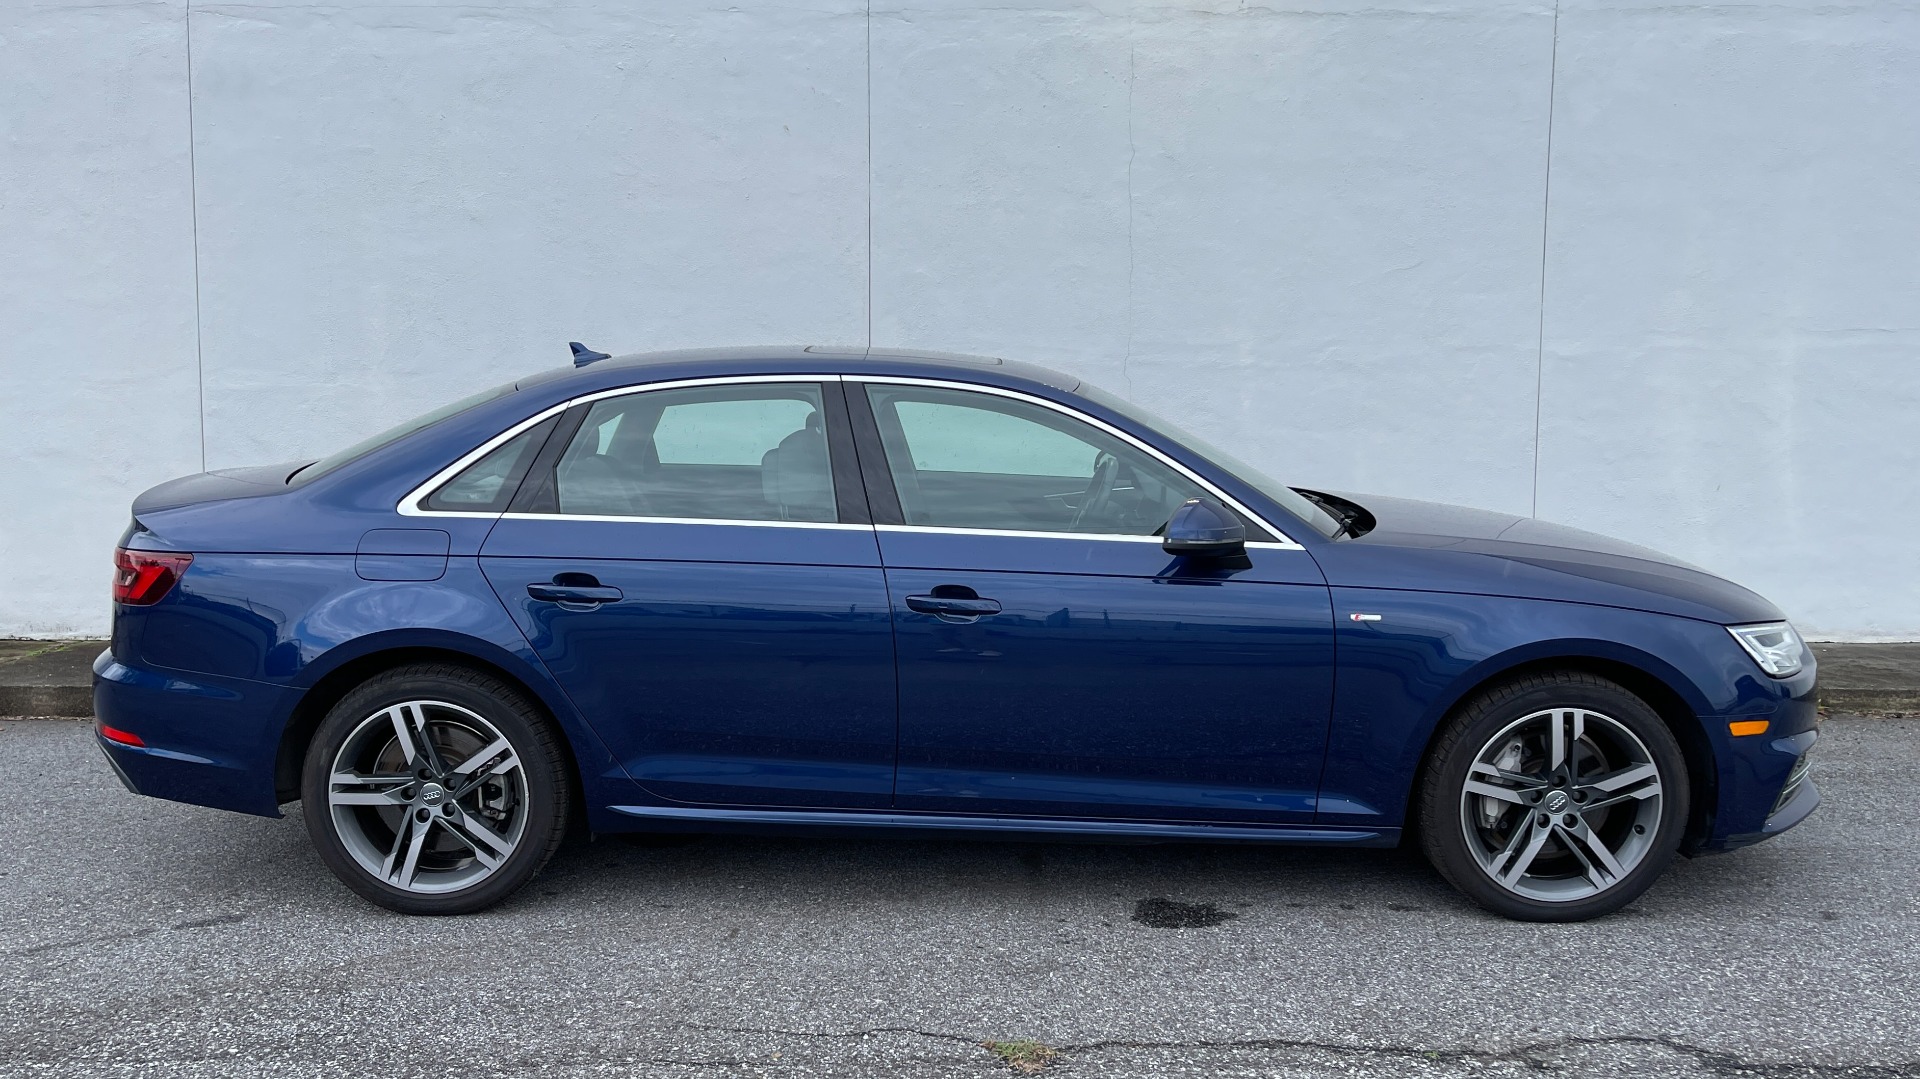 Used 2018 Audi A4 PREMIUM PLUS 2.0T / SUNROOF / CLD WTHR / B&O SND / REARVIEW for sale Sold at Formula Imports in Charlotte NC 28227 6